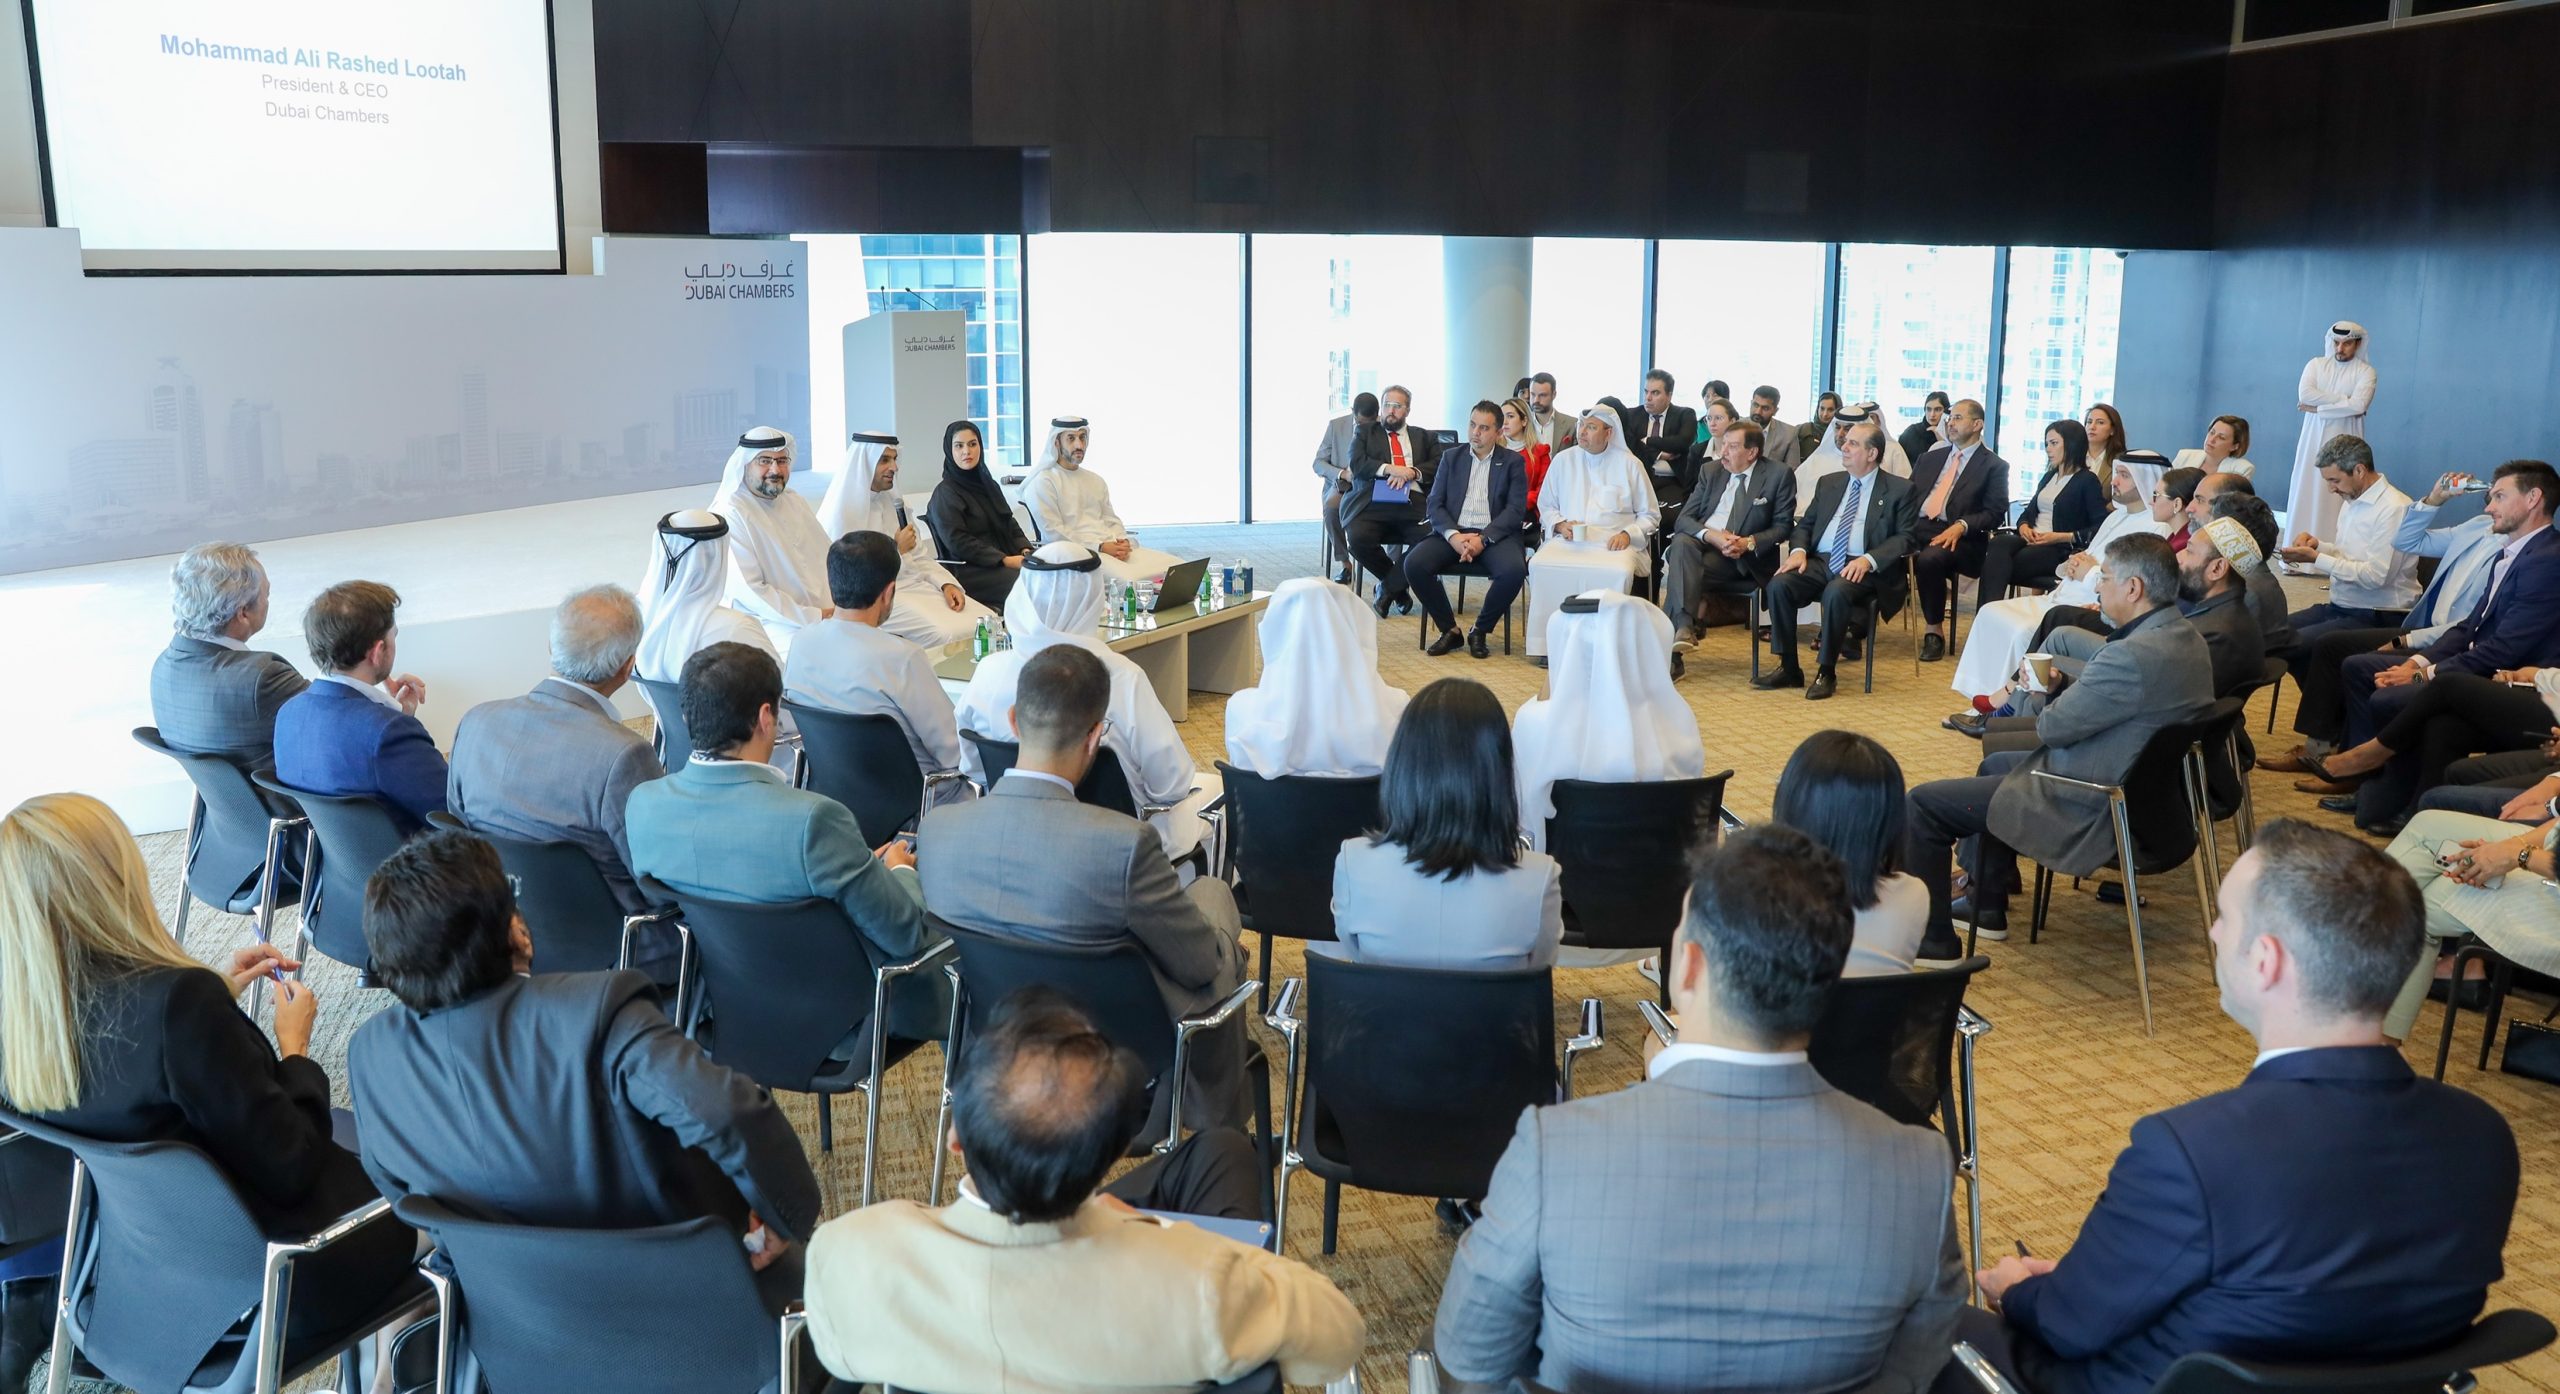 Dubai Chamber of Commerce reaffirms its commitment to empowering the business community and enhancing its competitiveness to drive economic growth